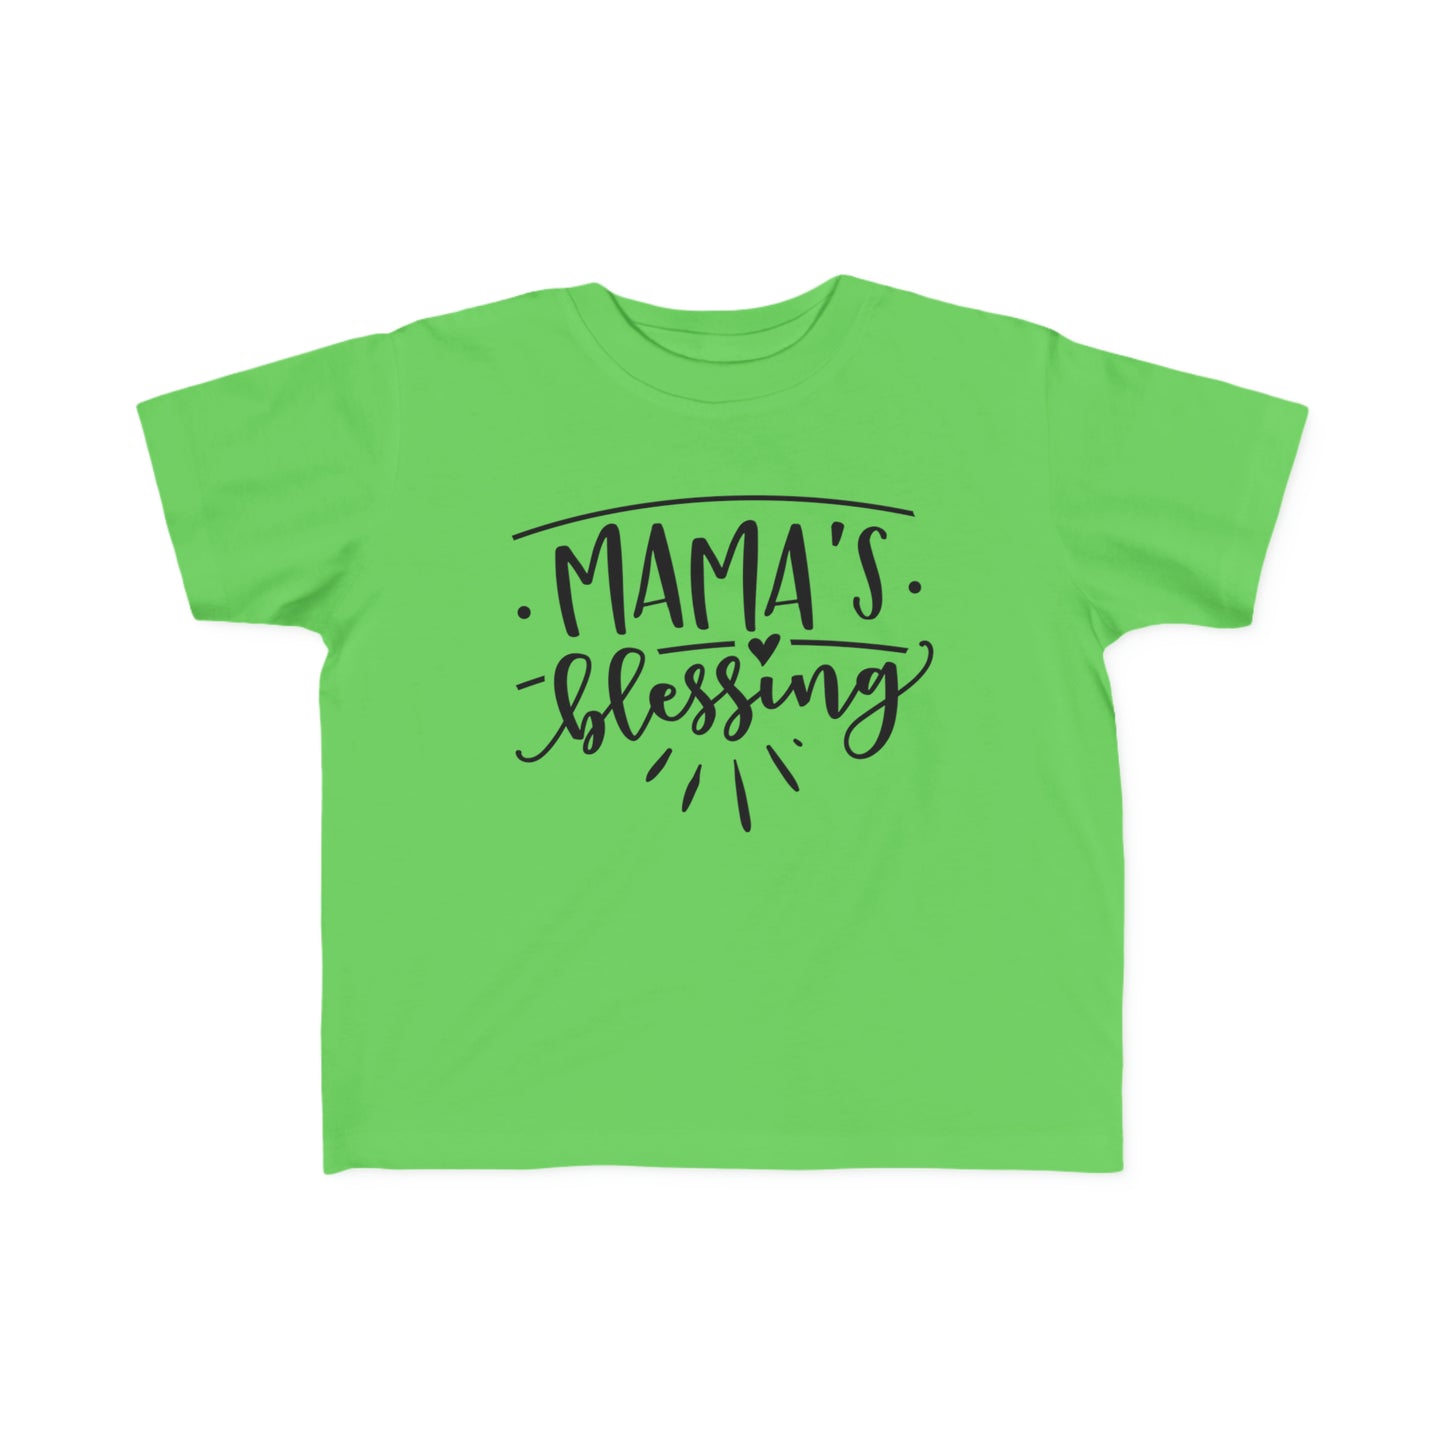 Mama's blessing Toddler's Fine Jersey Short Sleeve Tee